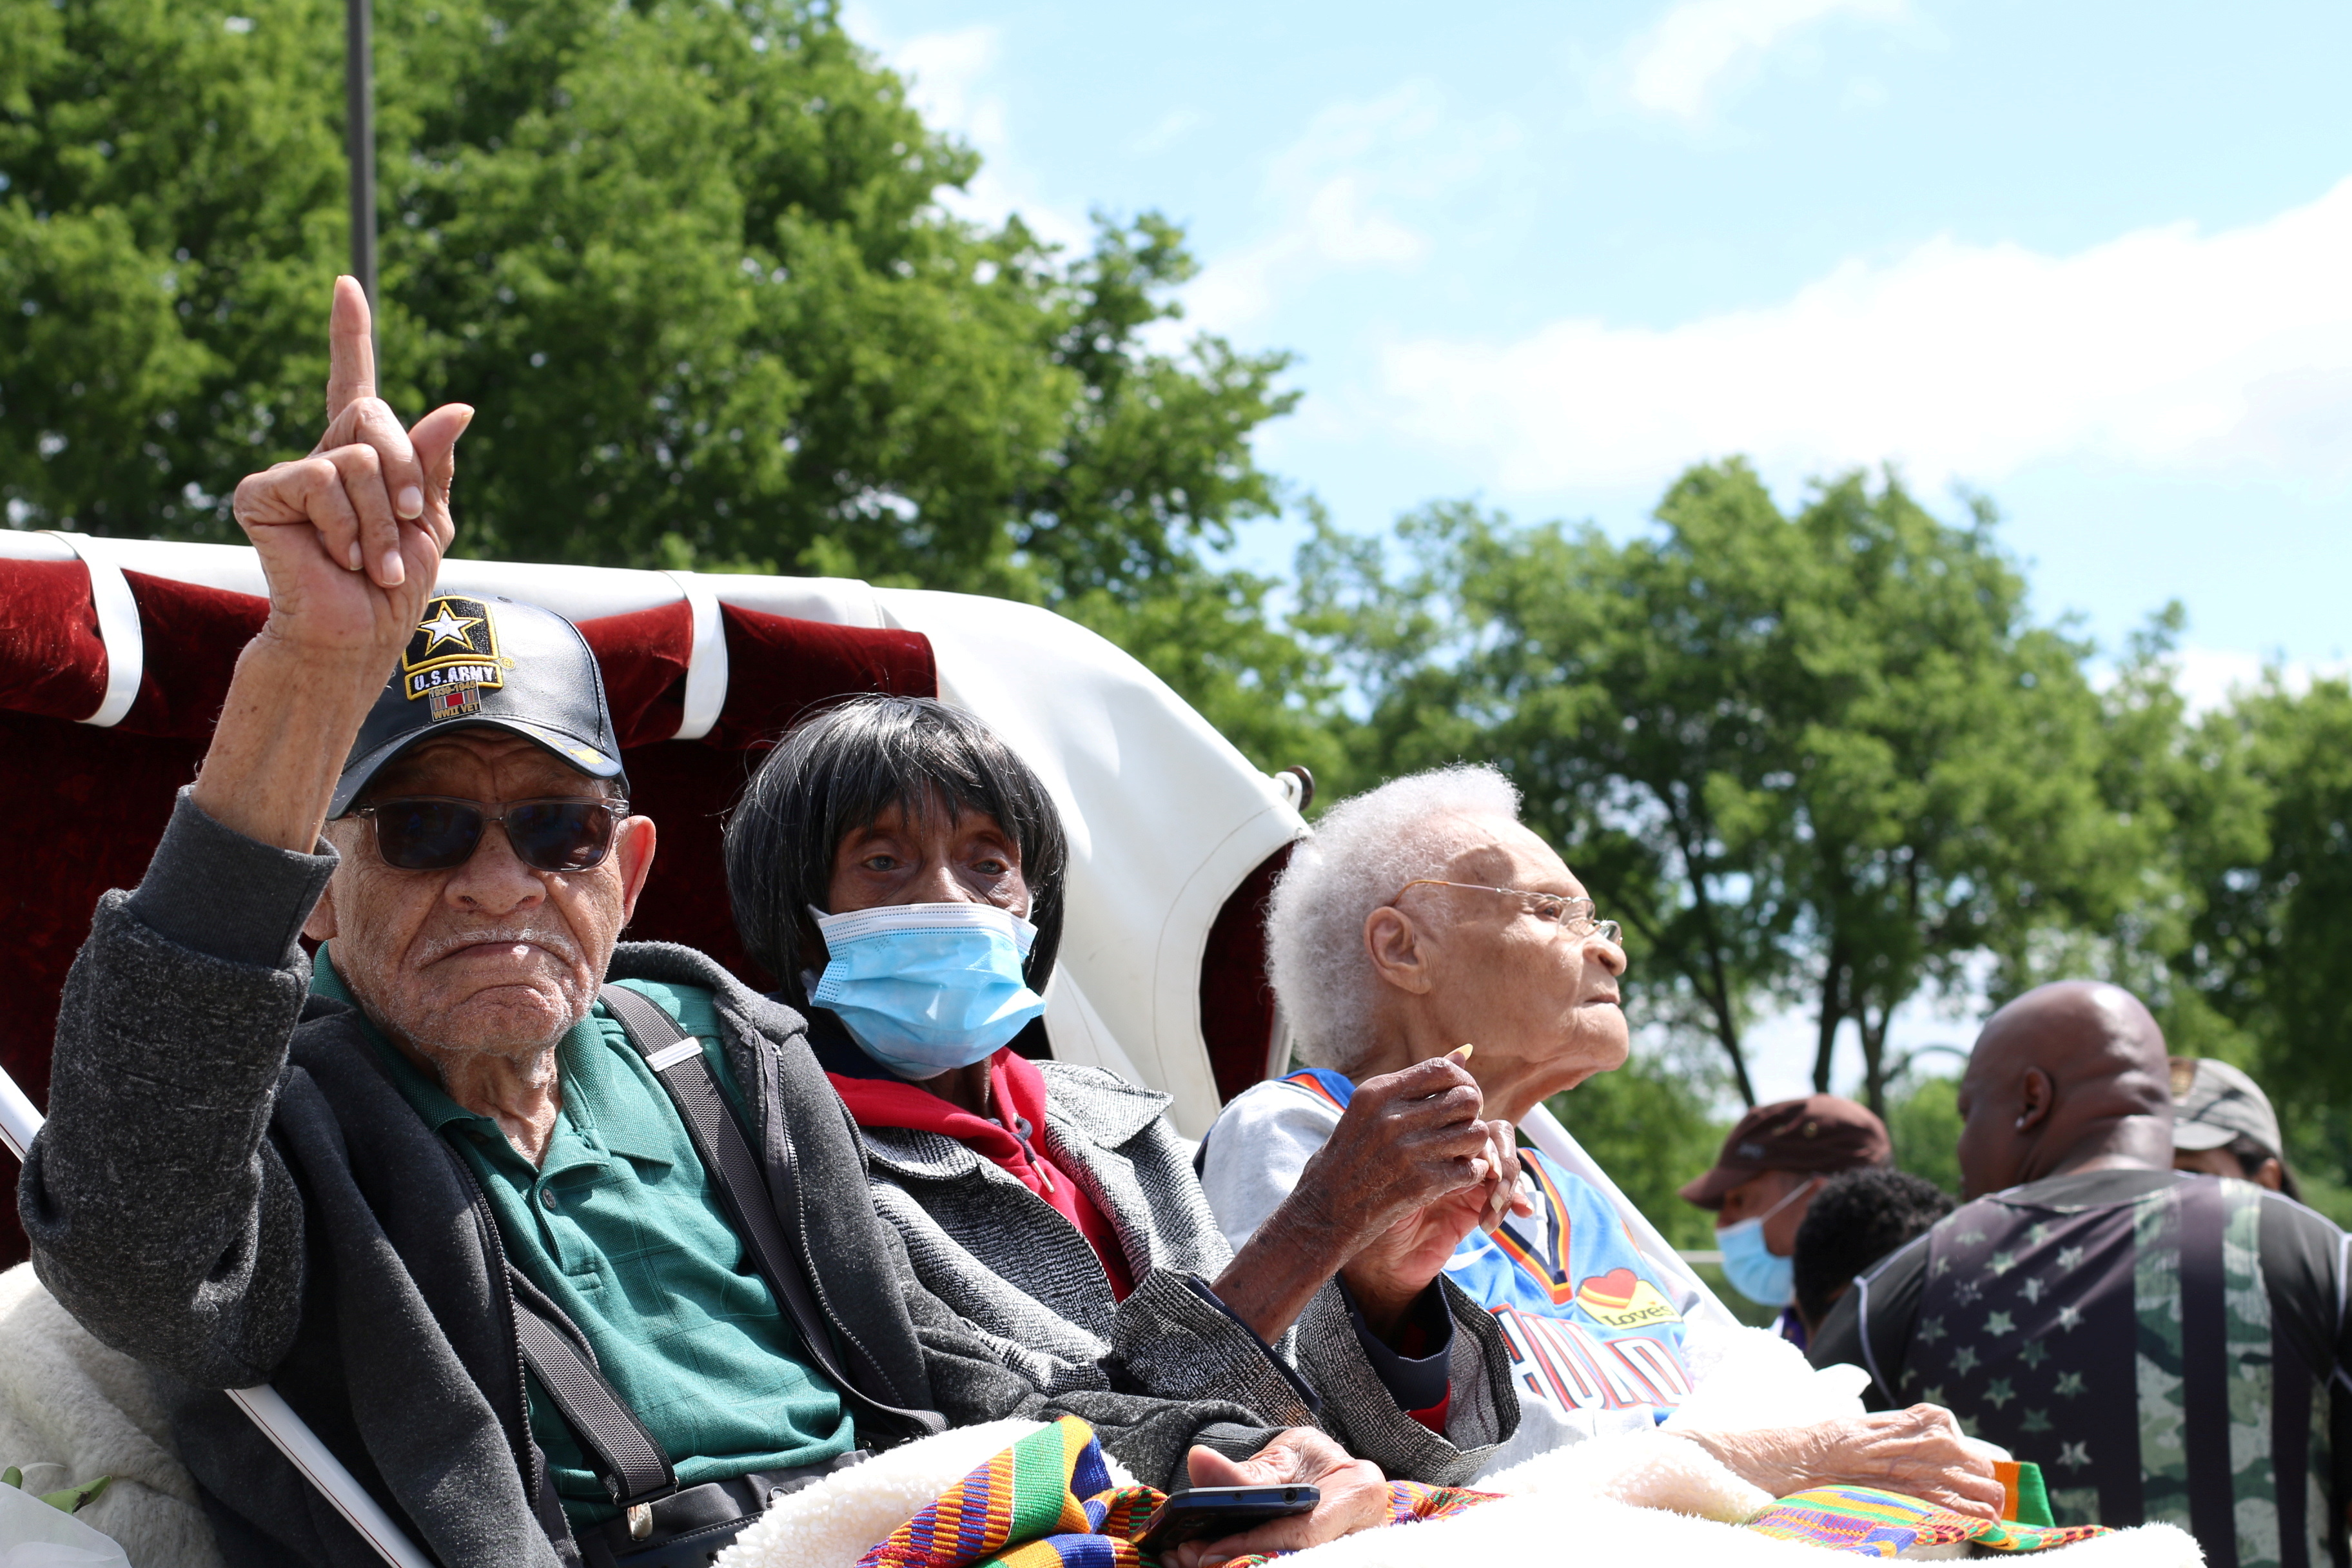 Hughes Van Ellis, 100, Lessie Benningfield Randle, 106, also known as Mother Randle, and Viola Fletcher, 107, the oldest living survivor of the Tulsa Race Massacre and older sister of Van Ellis, attend the Black Wall Street Legacy Festival 2021 in Tulsa, Oklahoma, U.S., May 28, 2021. REUTERS/Polly Irungu